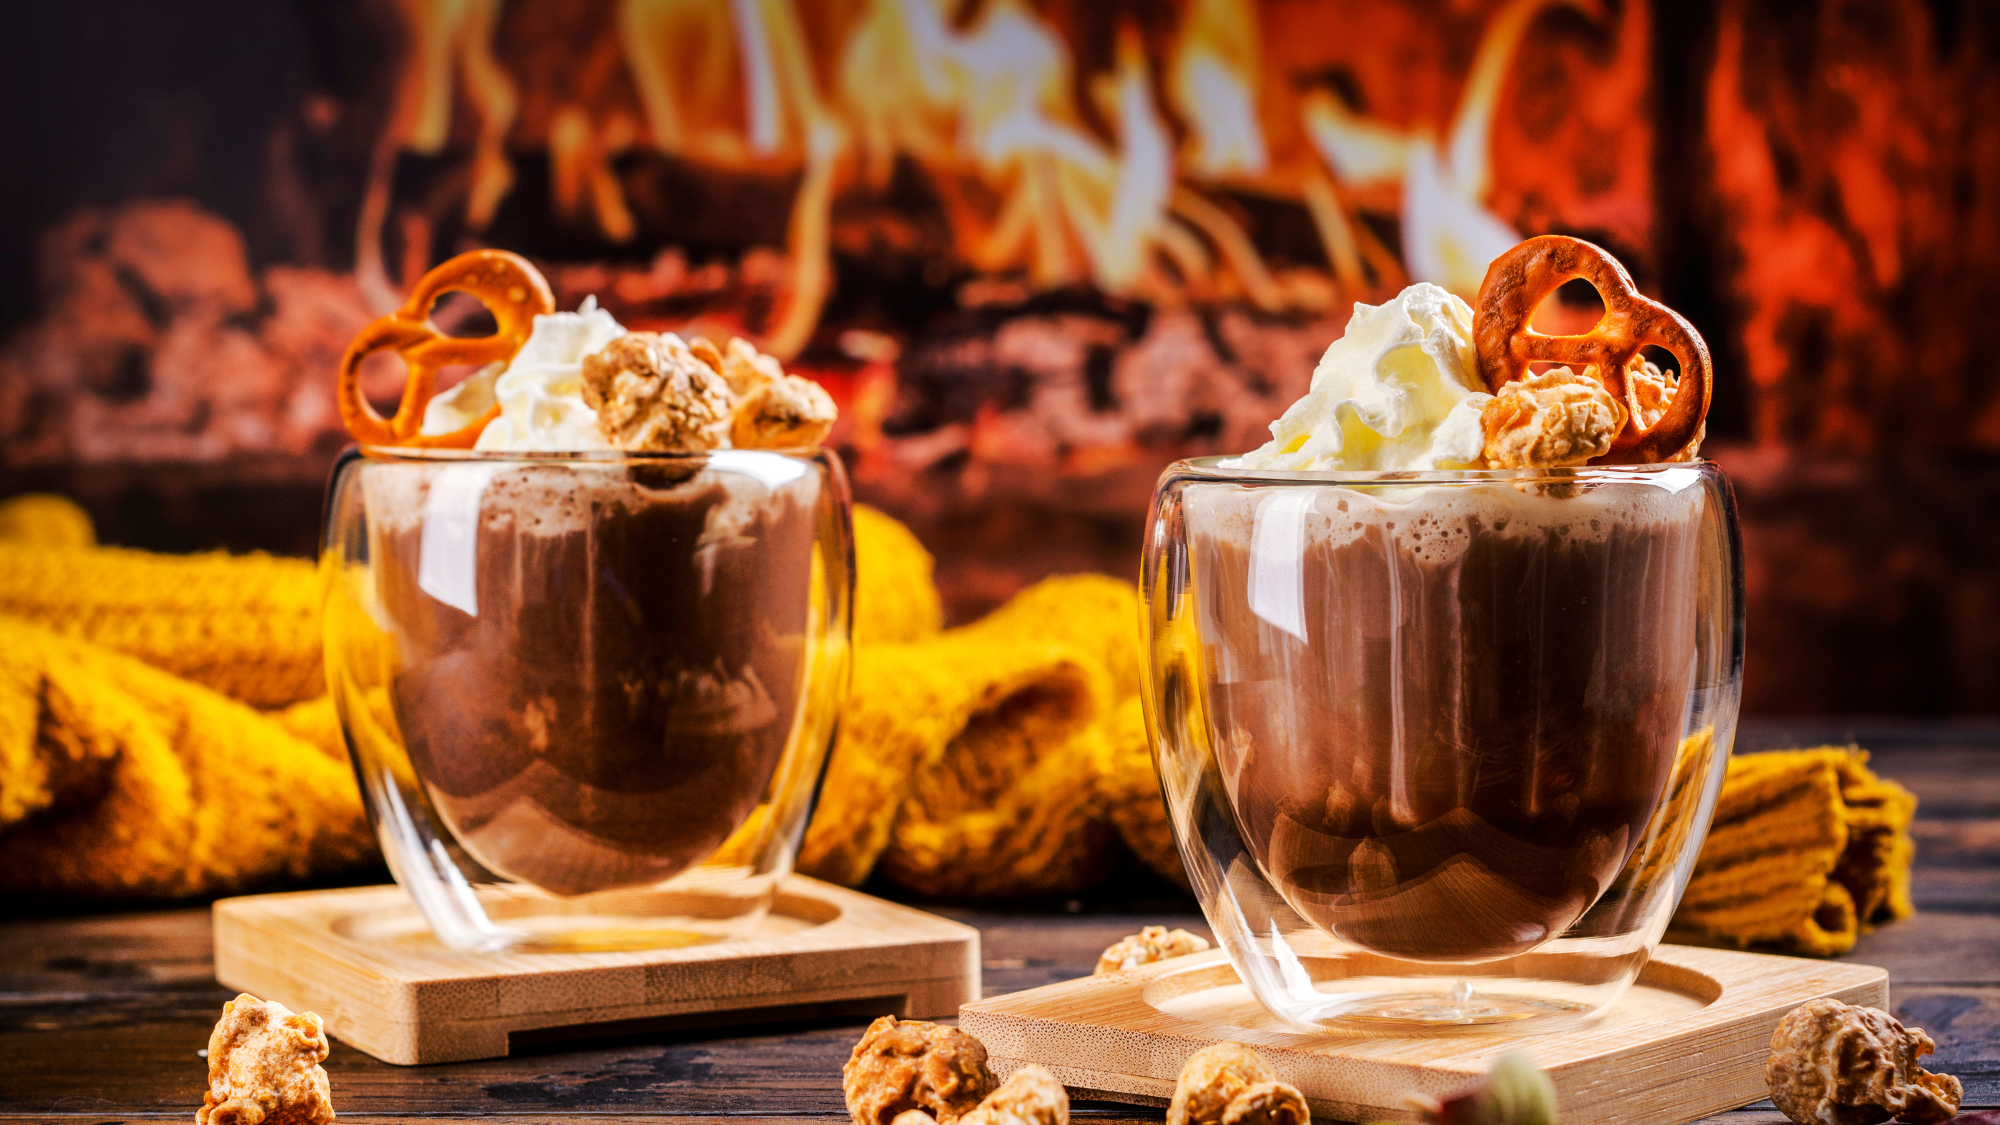 cozy winter recipes - two fancy glass cups with hot chocolate and whipped cream in front of a blazing indoor fireplace